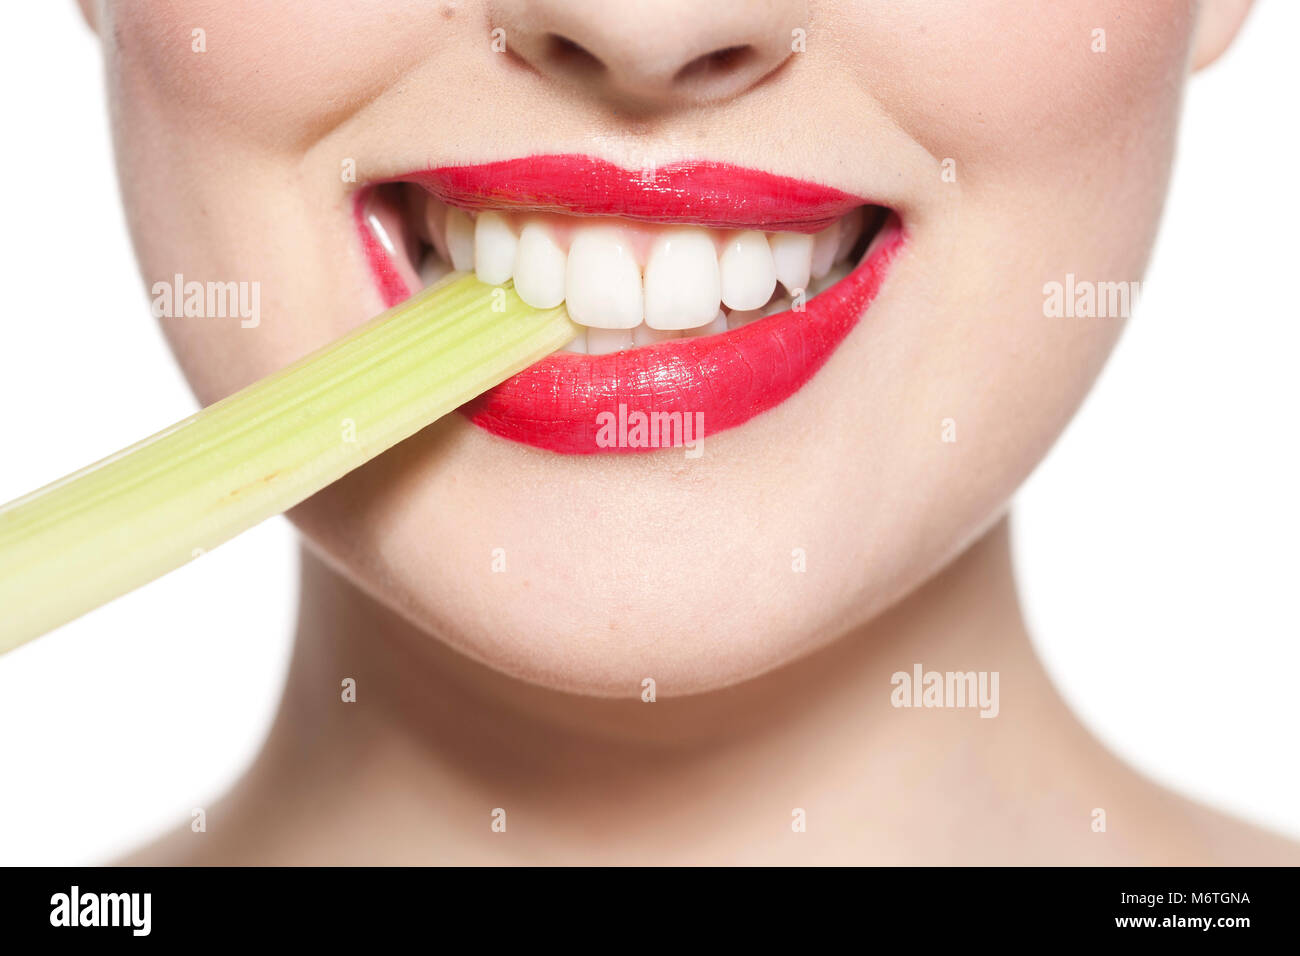 Close up of woman's mouth with celery stick Stock Photo